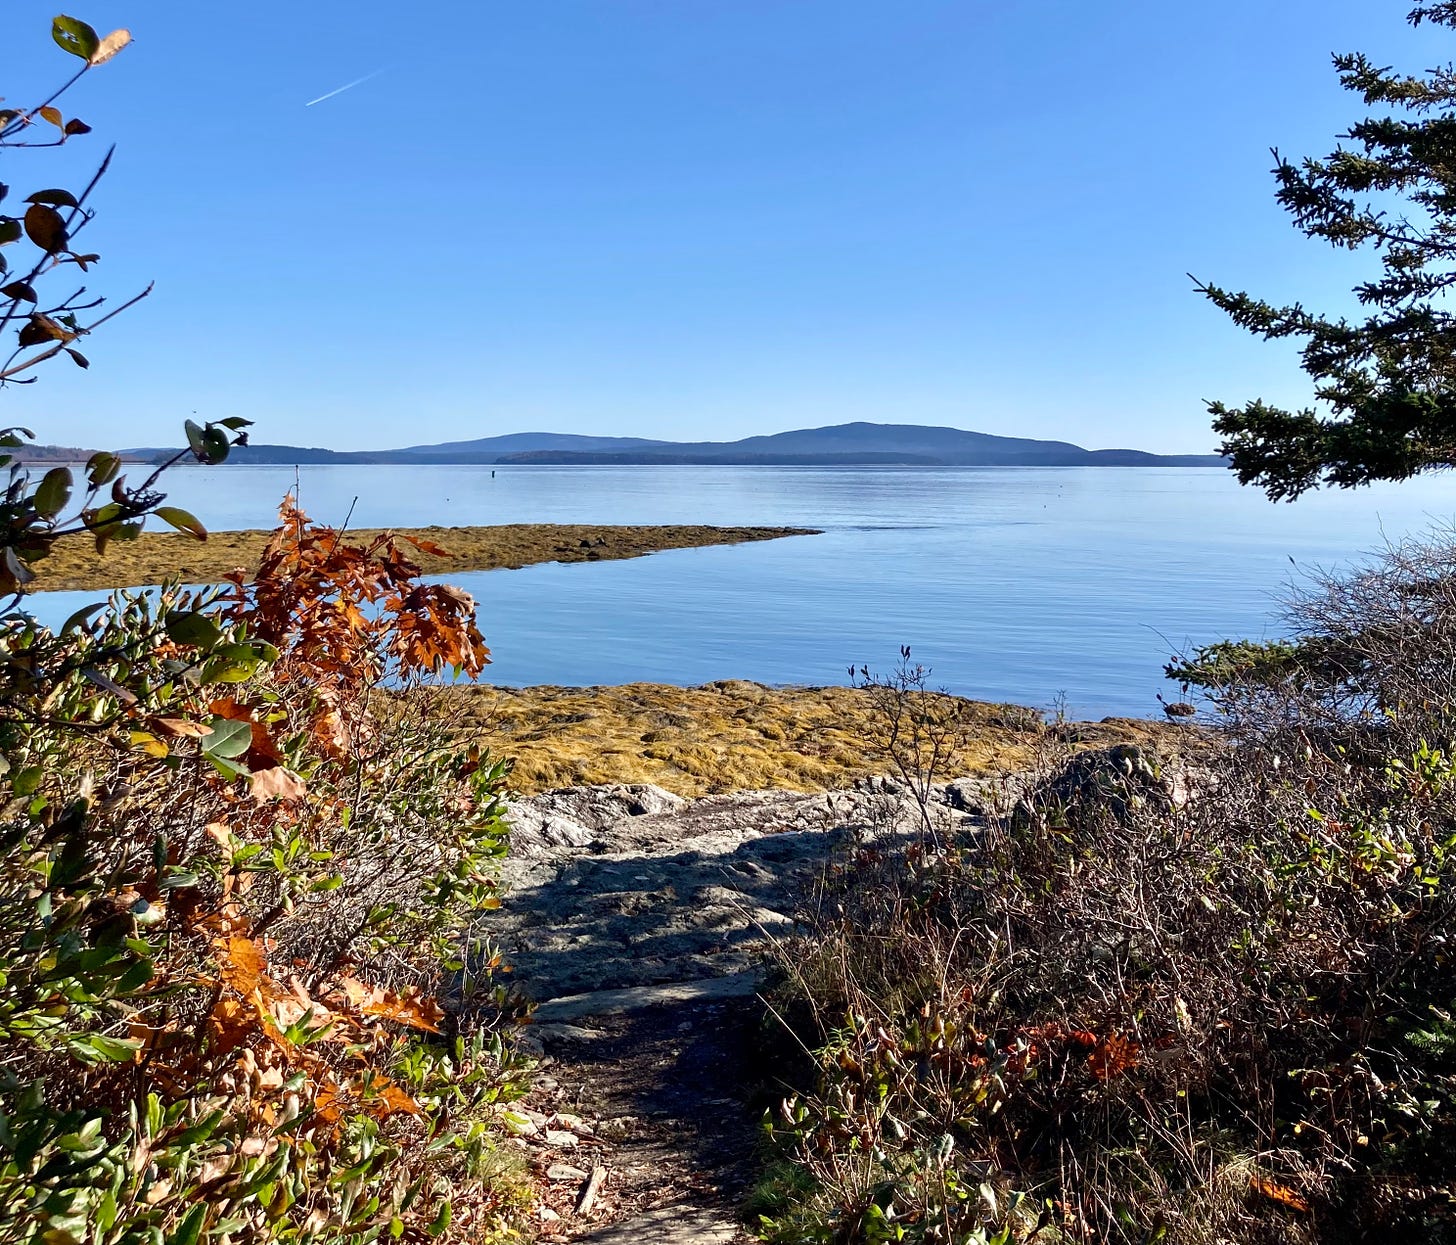 A hiking path through shrubs in downeast Maine. There is a view of the ocean and mountains in the distance across the water. 